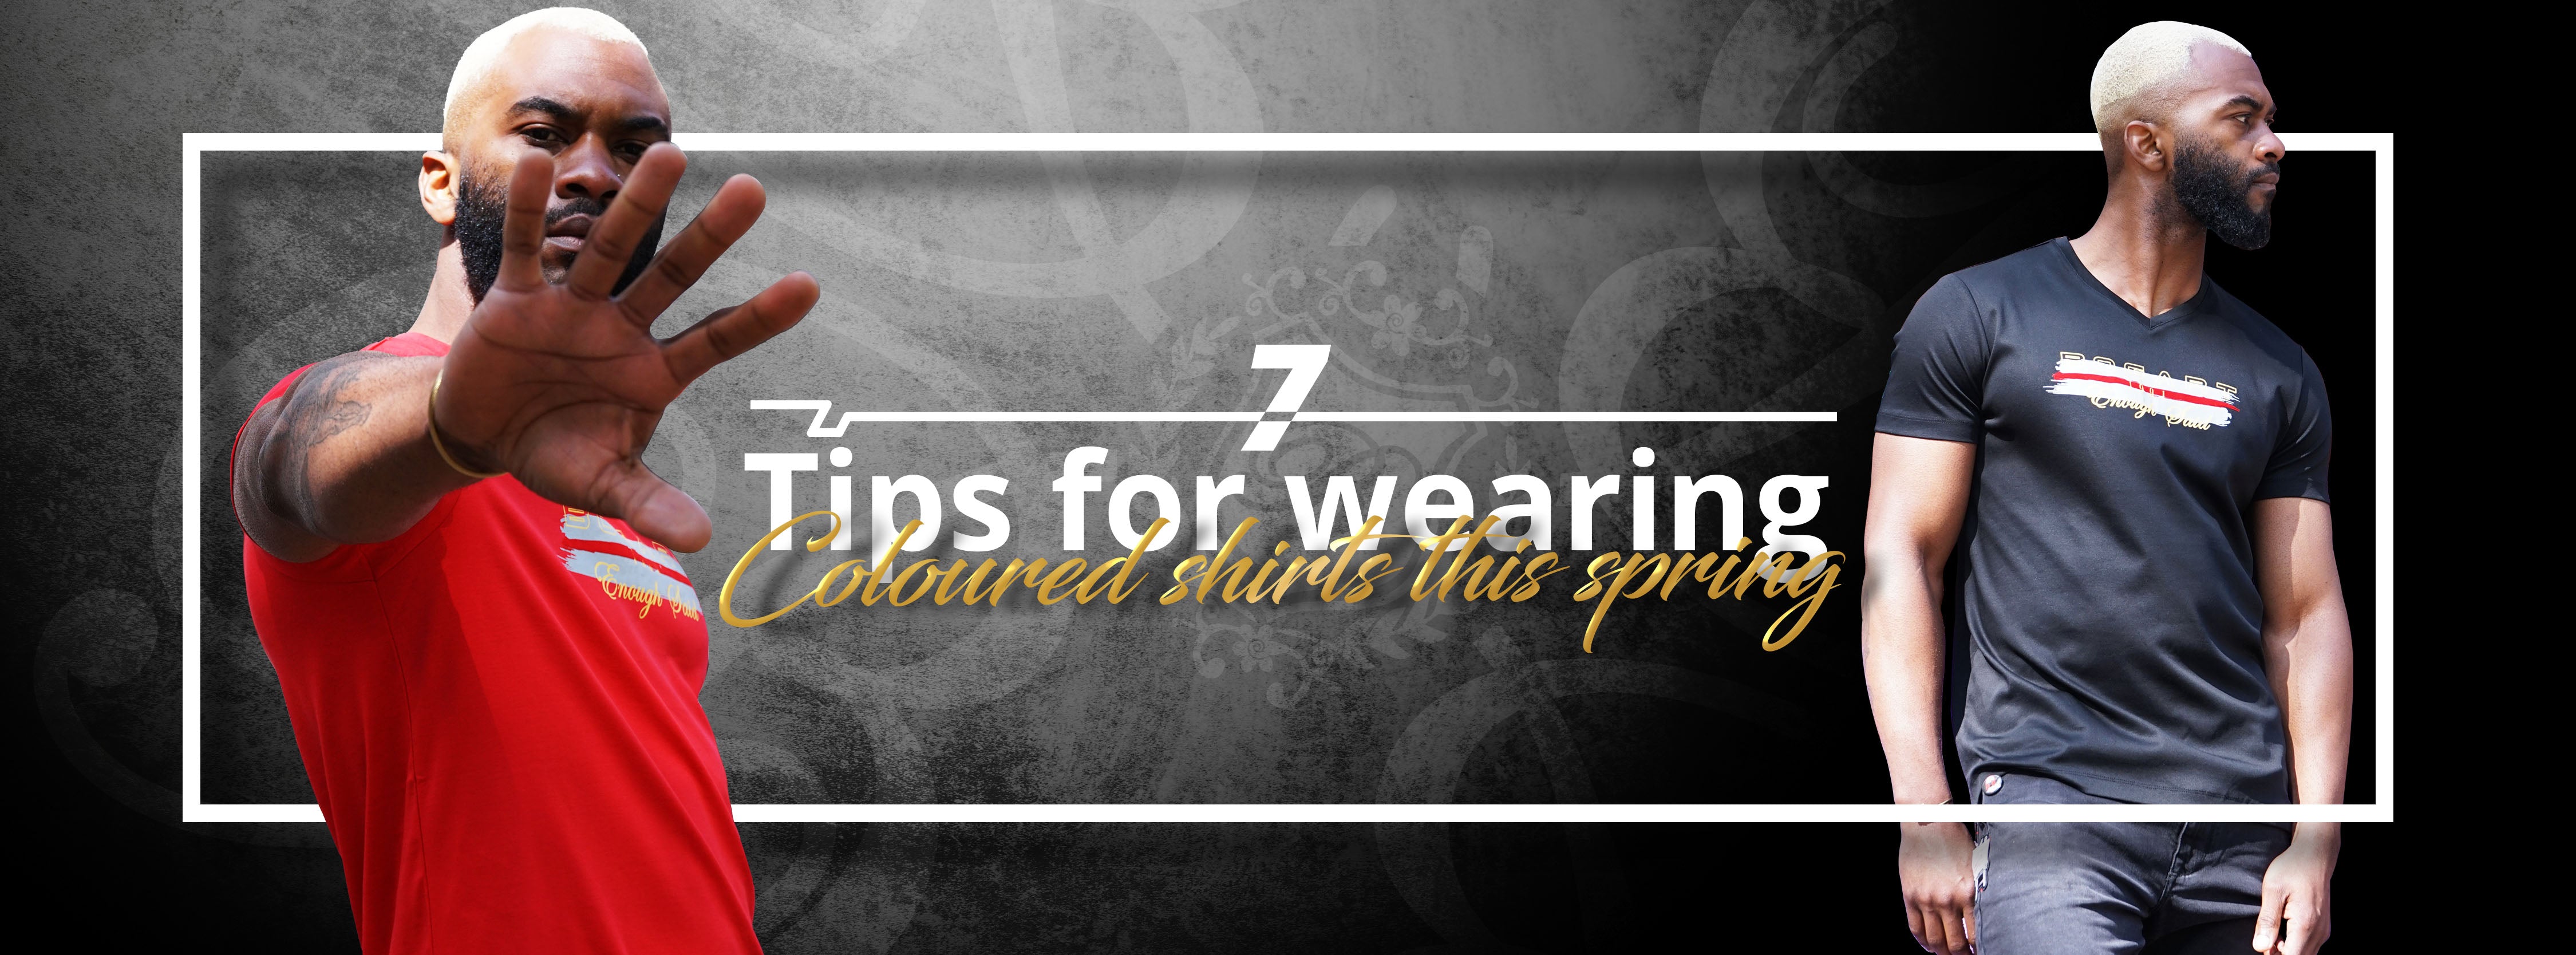 7 Tips for wearing coloured shirts this spring banner image